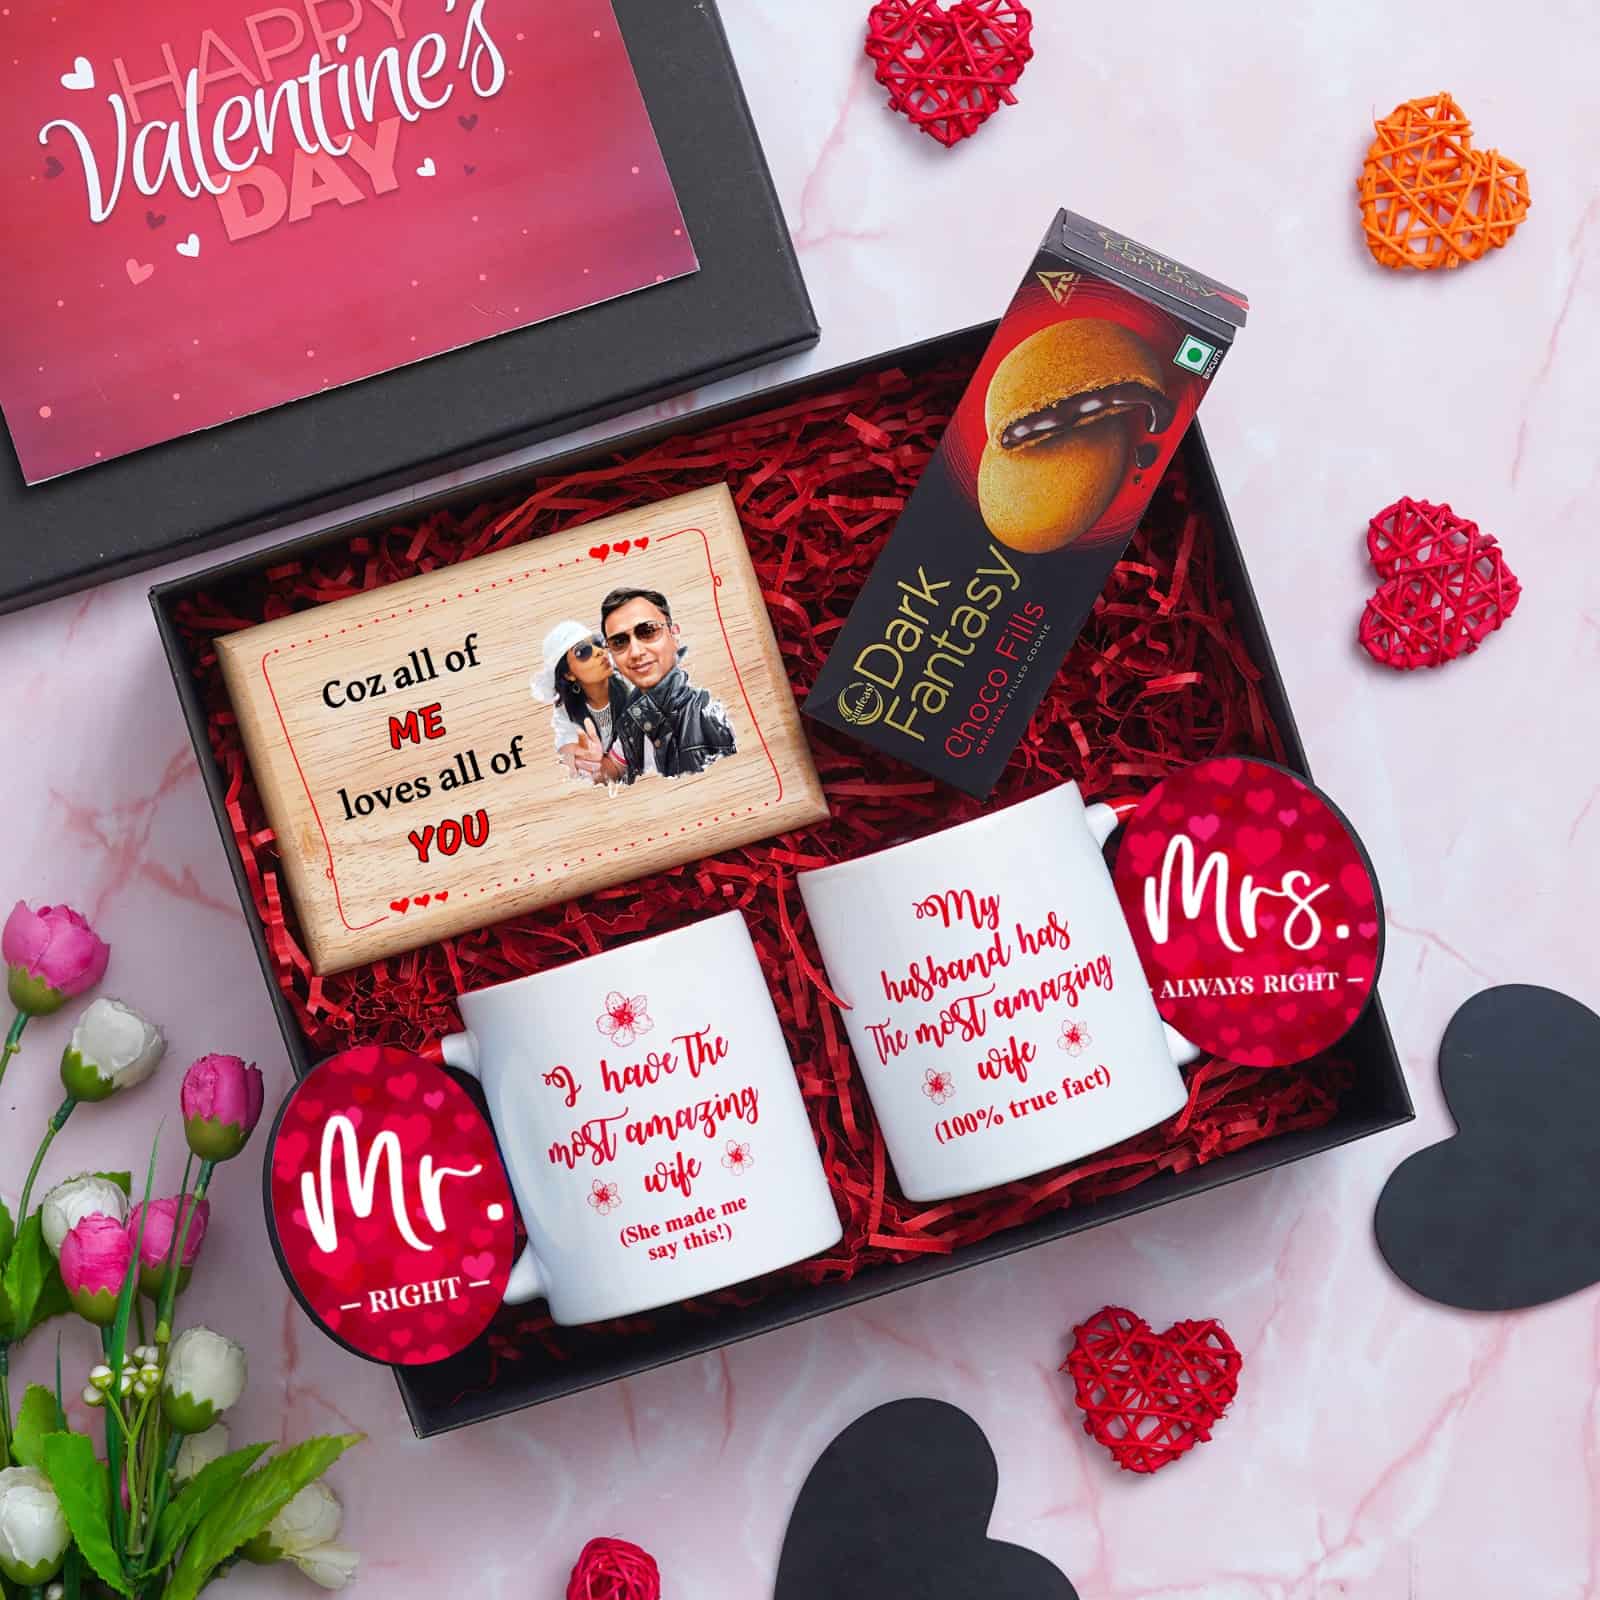 Top 10 Valentine's Day Gifts for Her | The Table by Harry & David